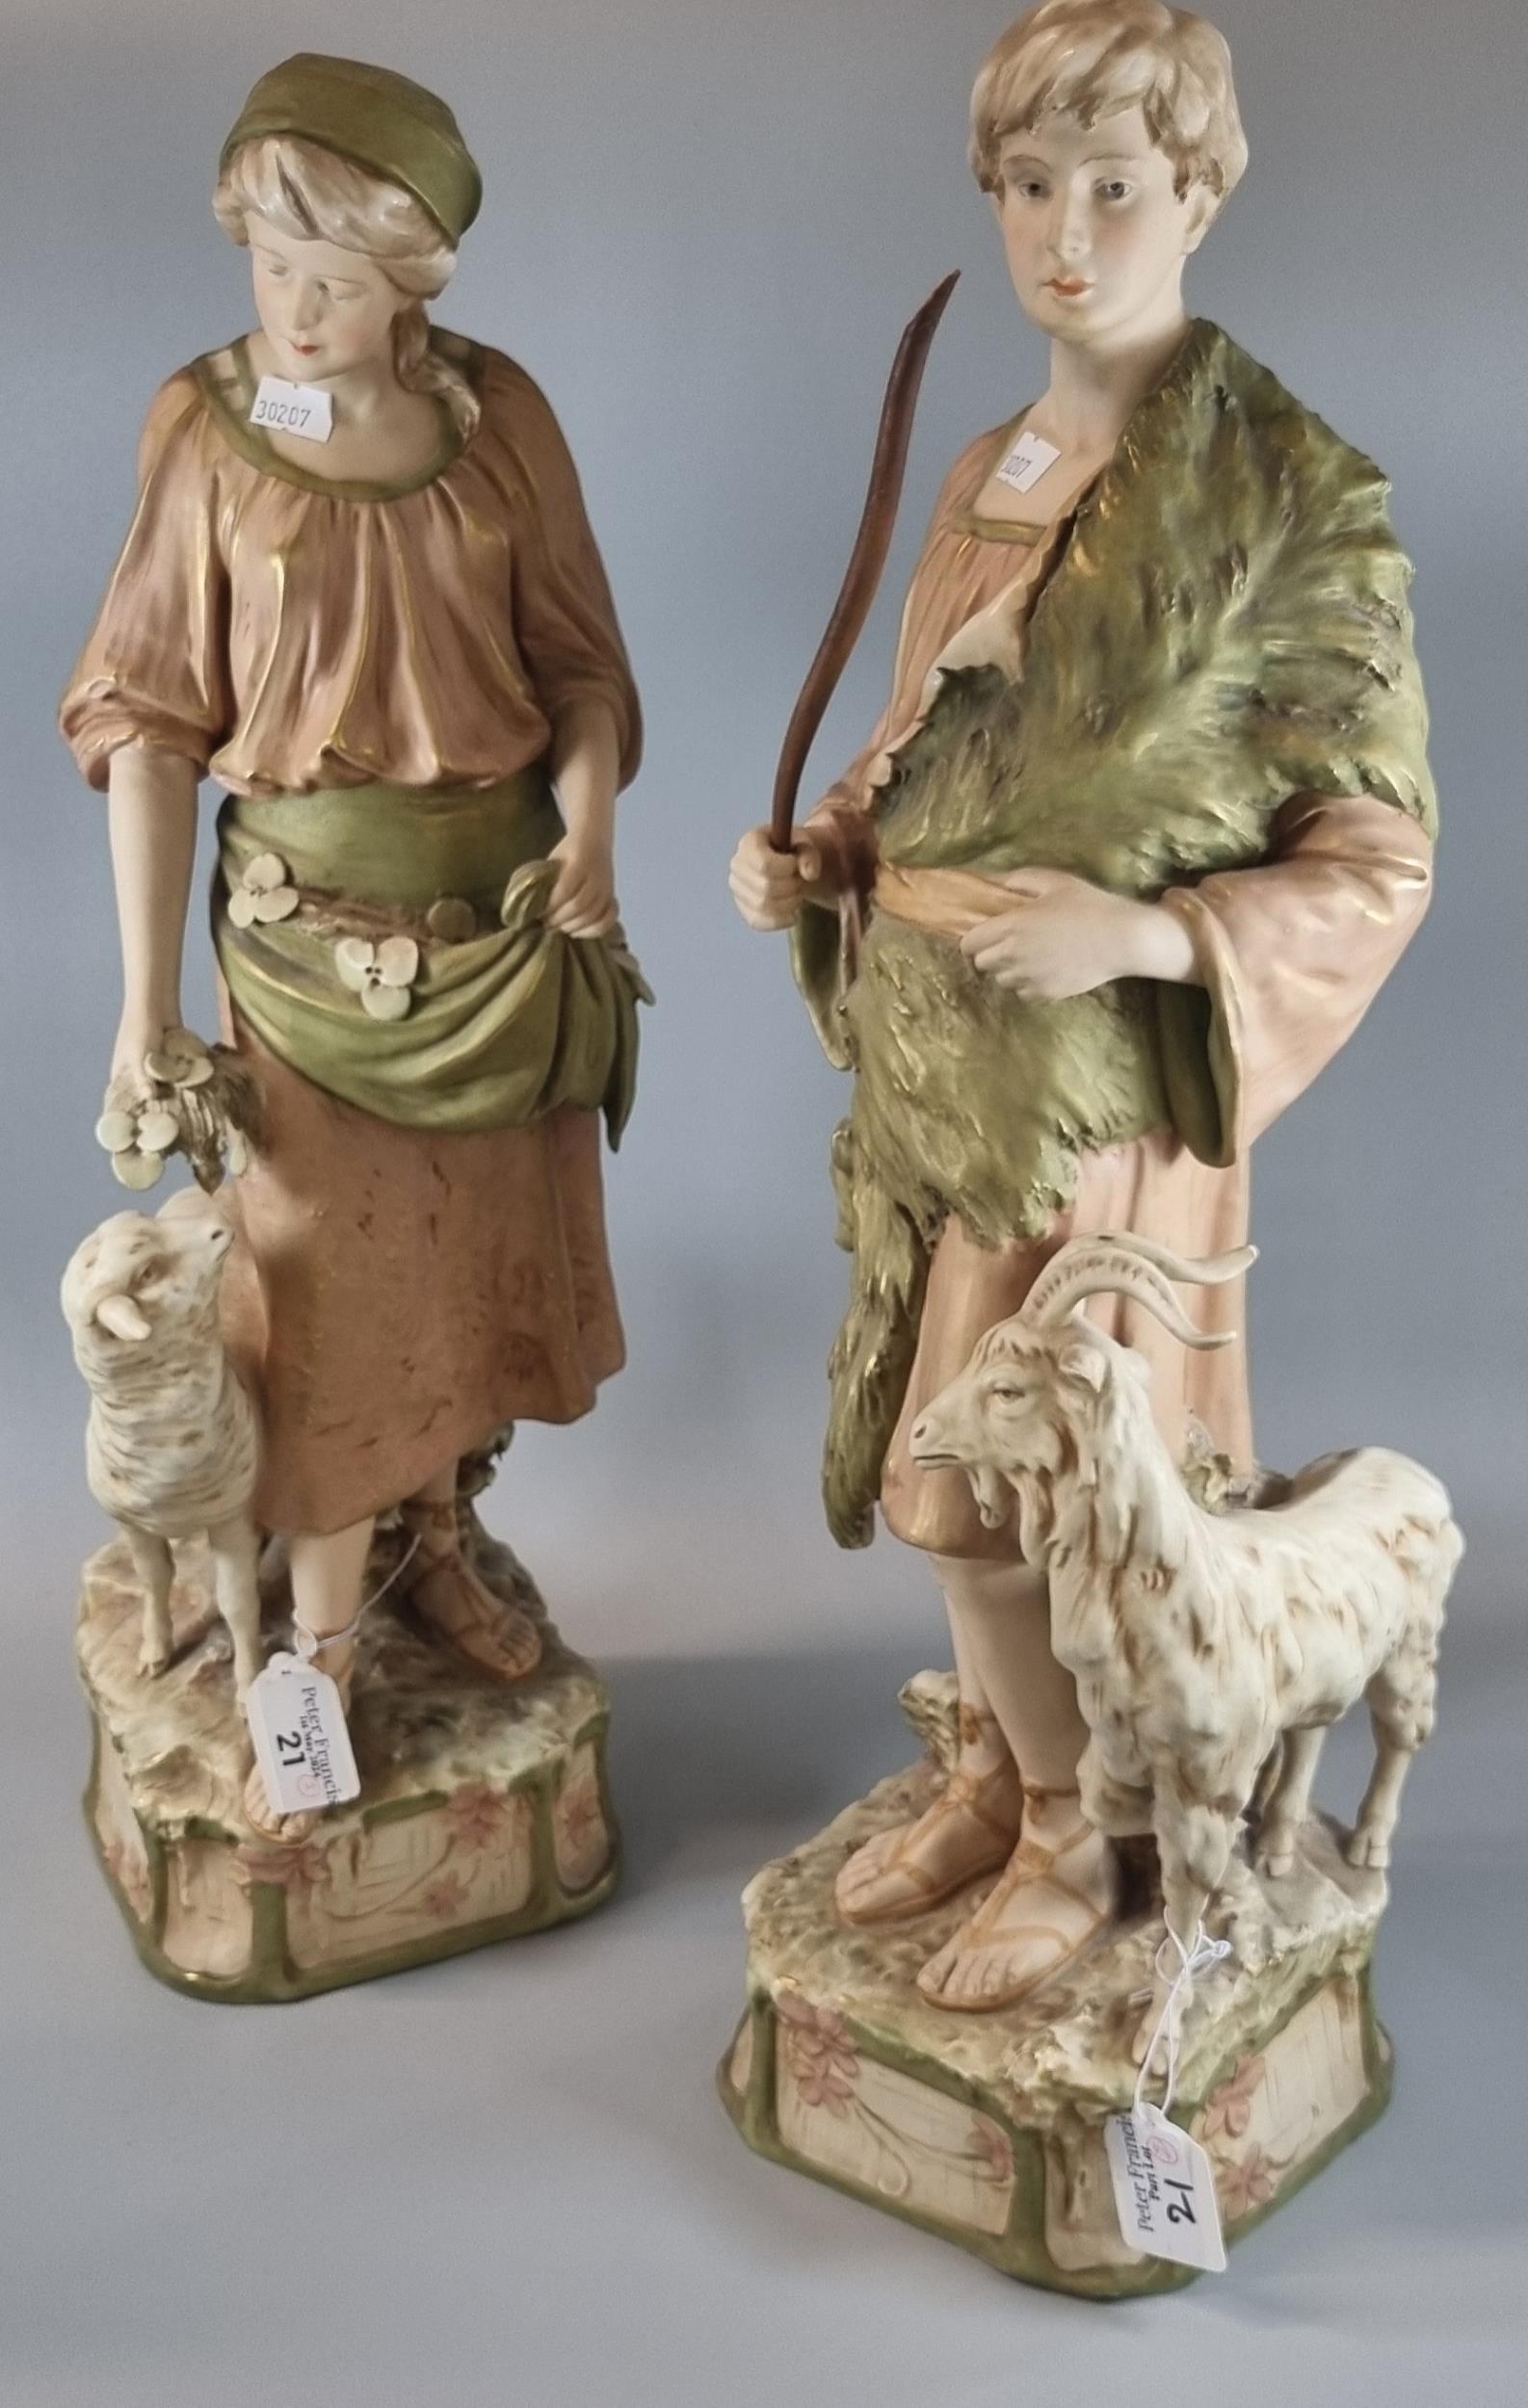 Pair of early 20th century Royal Dux figurines of a Shepherd (goat herder) and shepherdess.